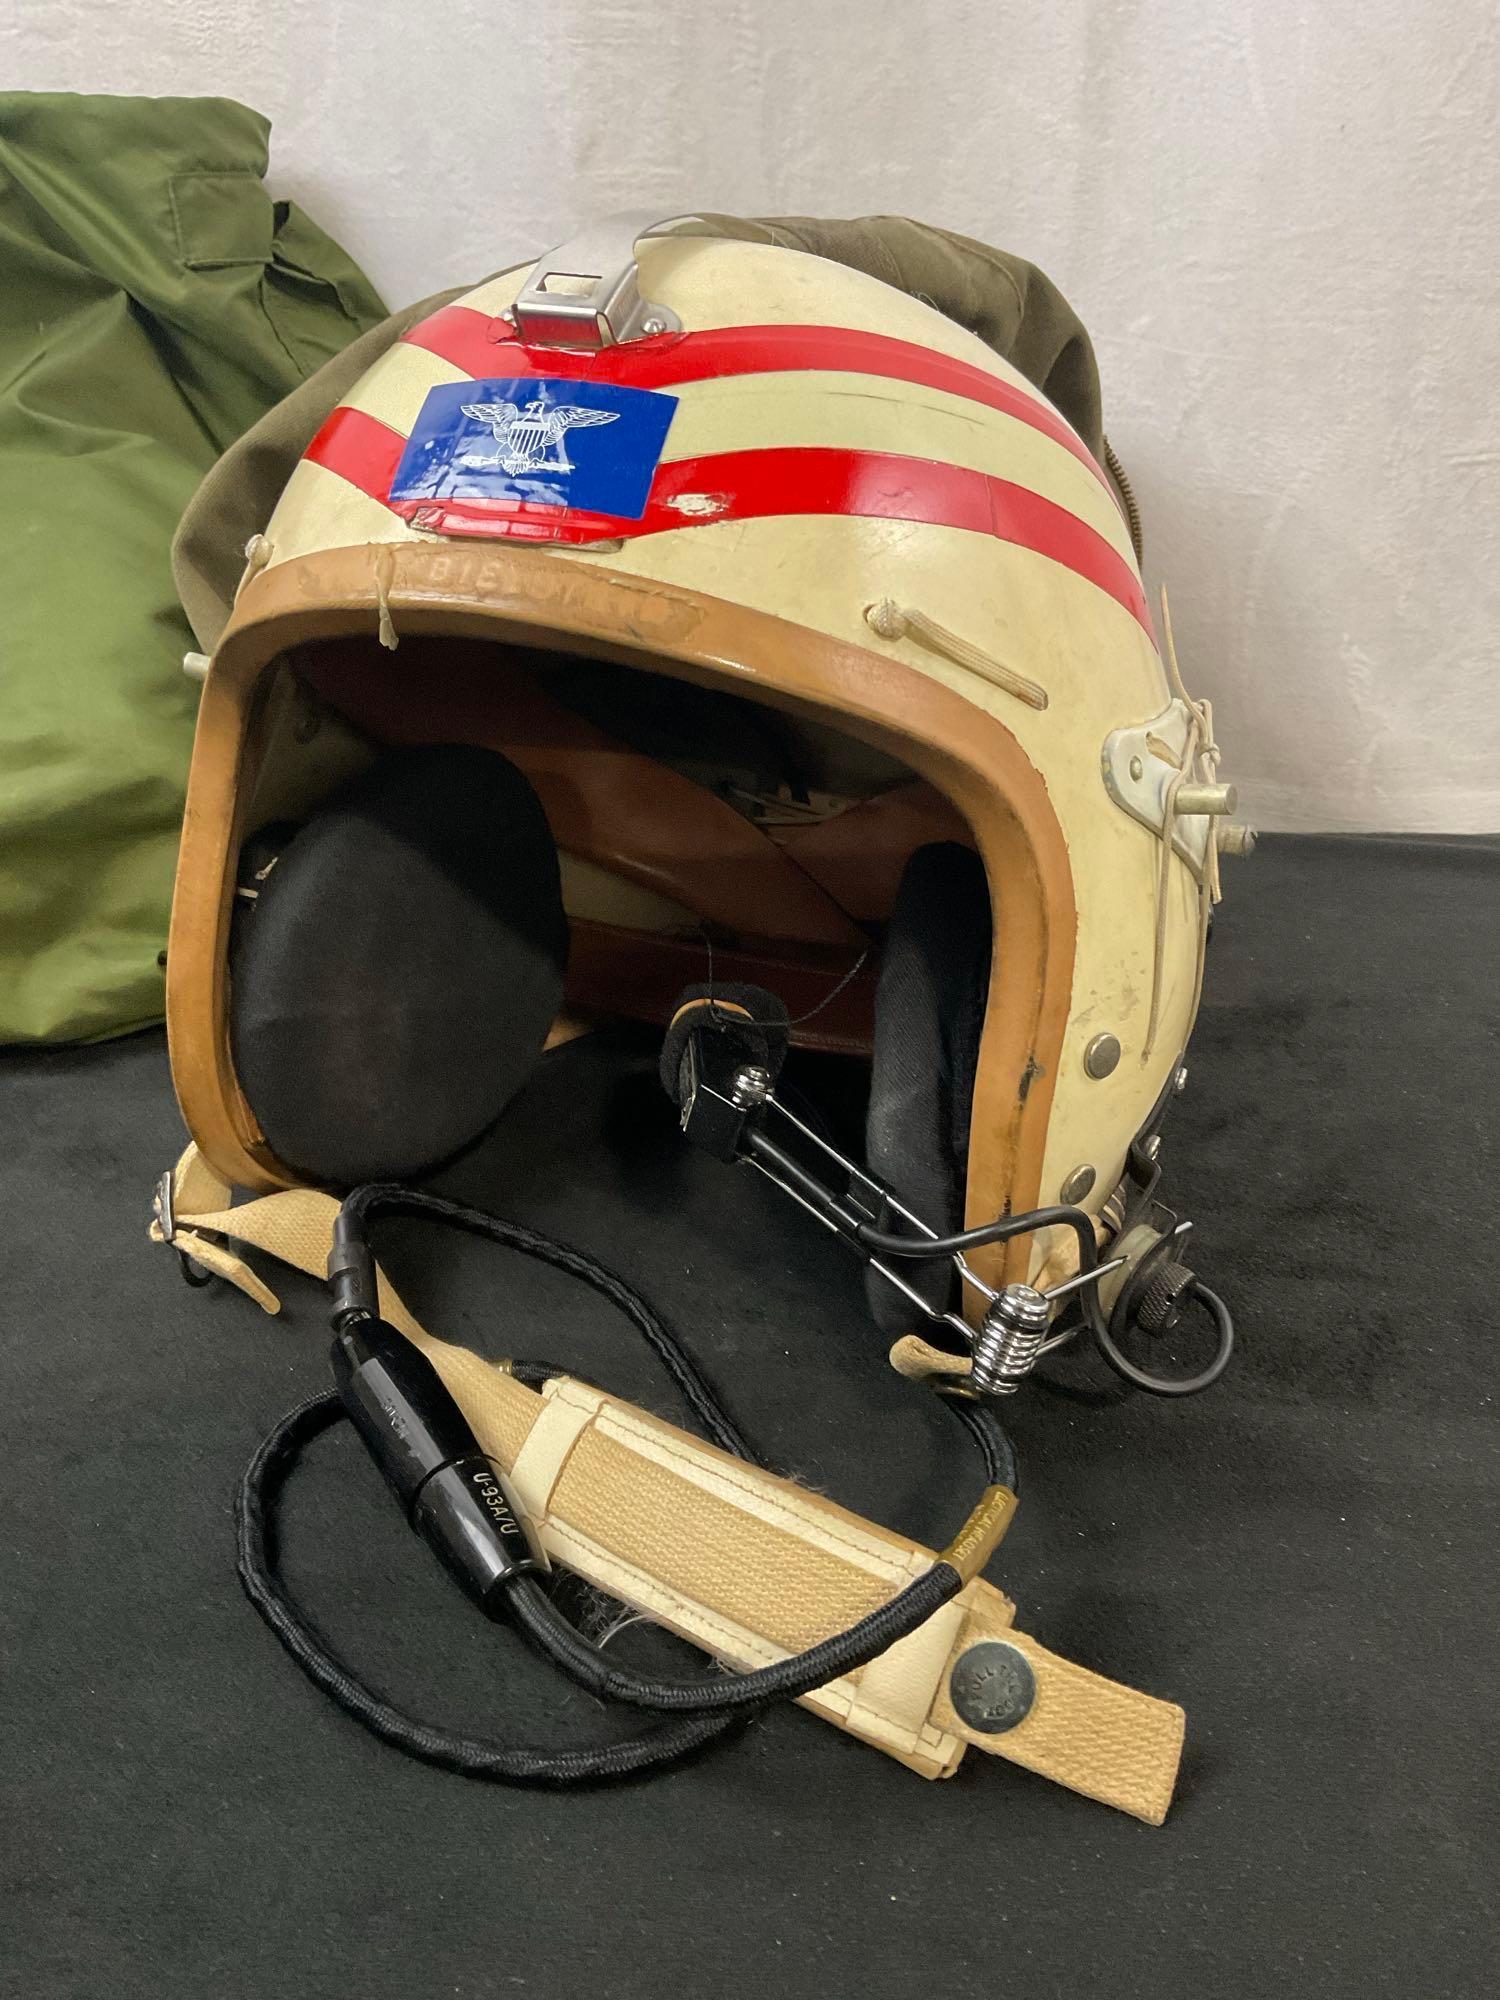 USAF type P-4A Flying Helmet, Olive Drab Bag, Assorted Civil Air Patrol Papers and maps